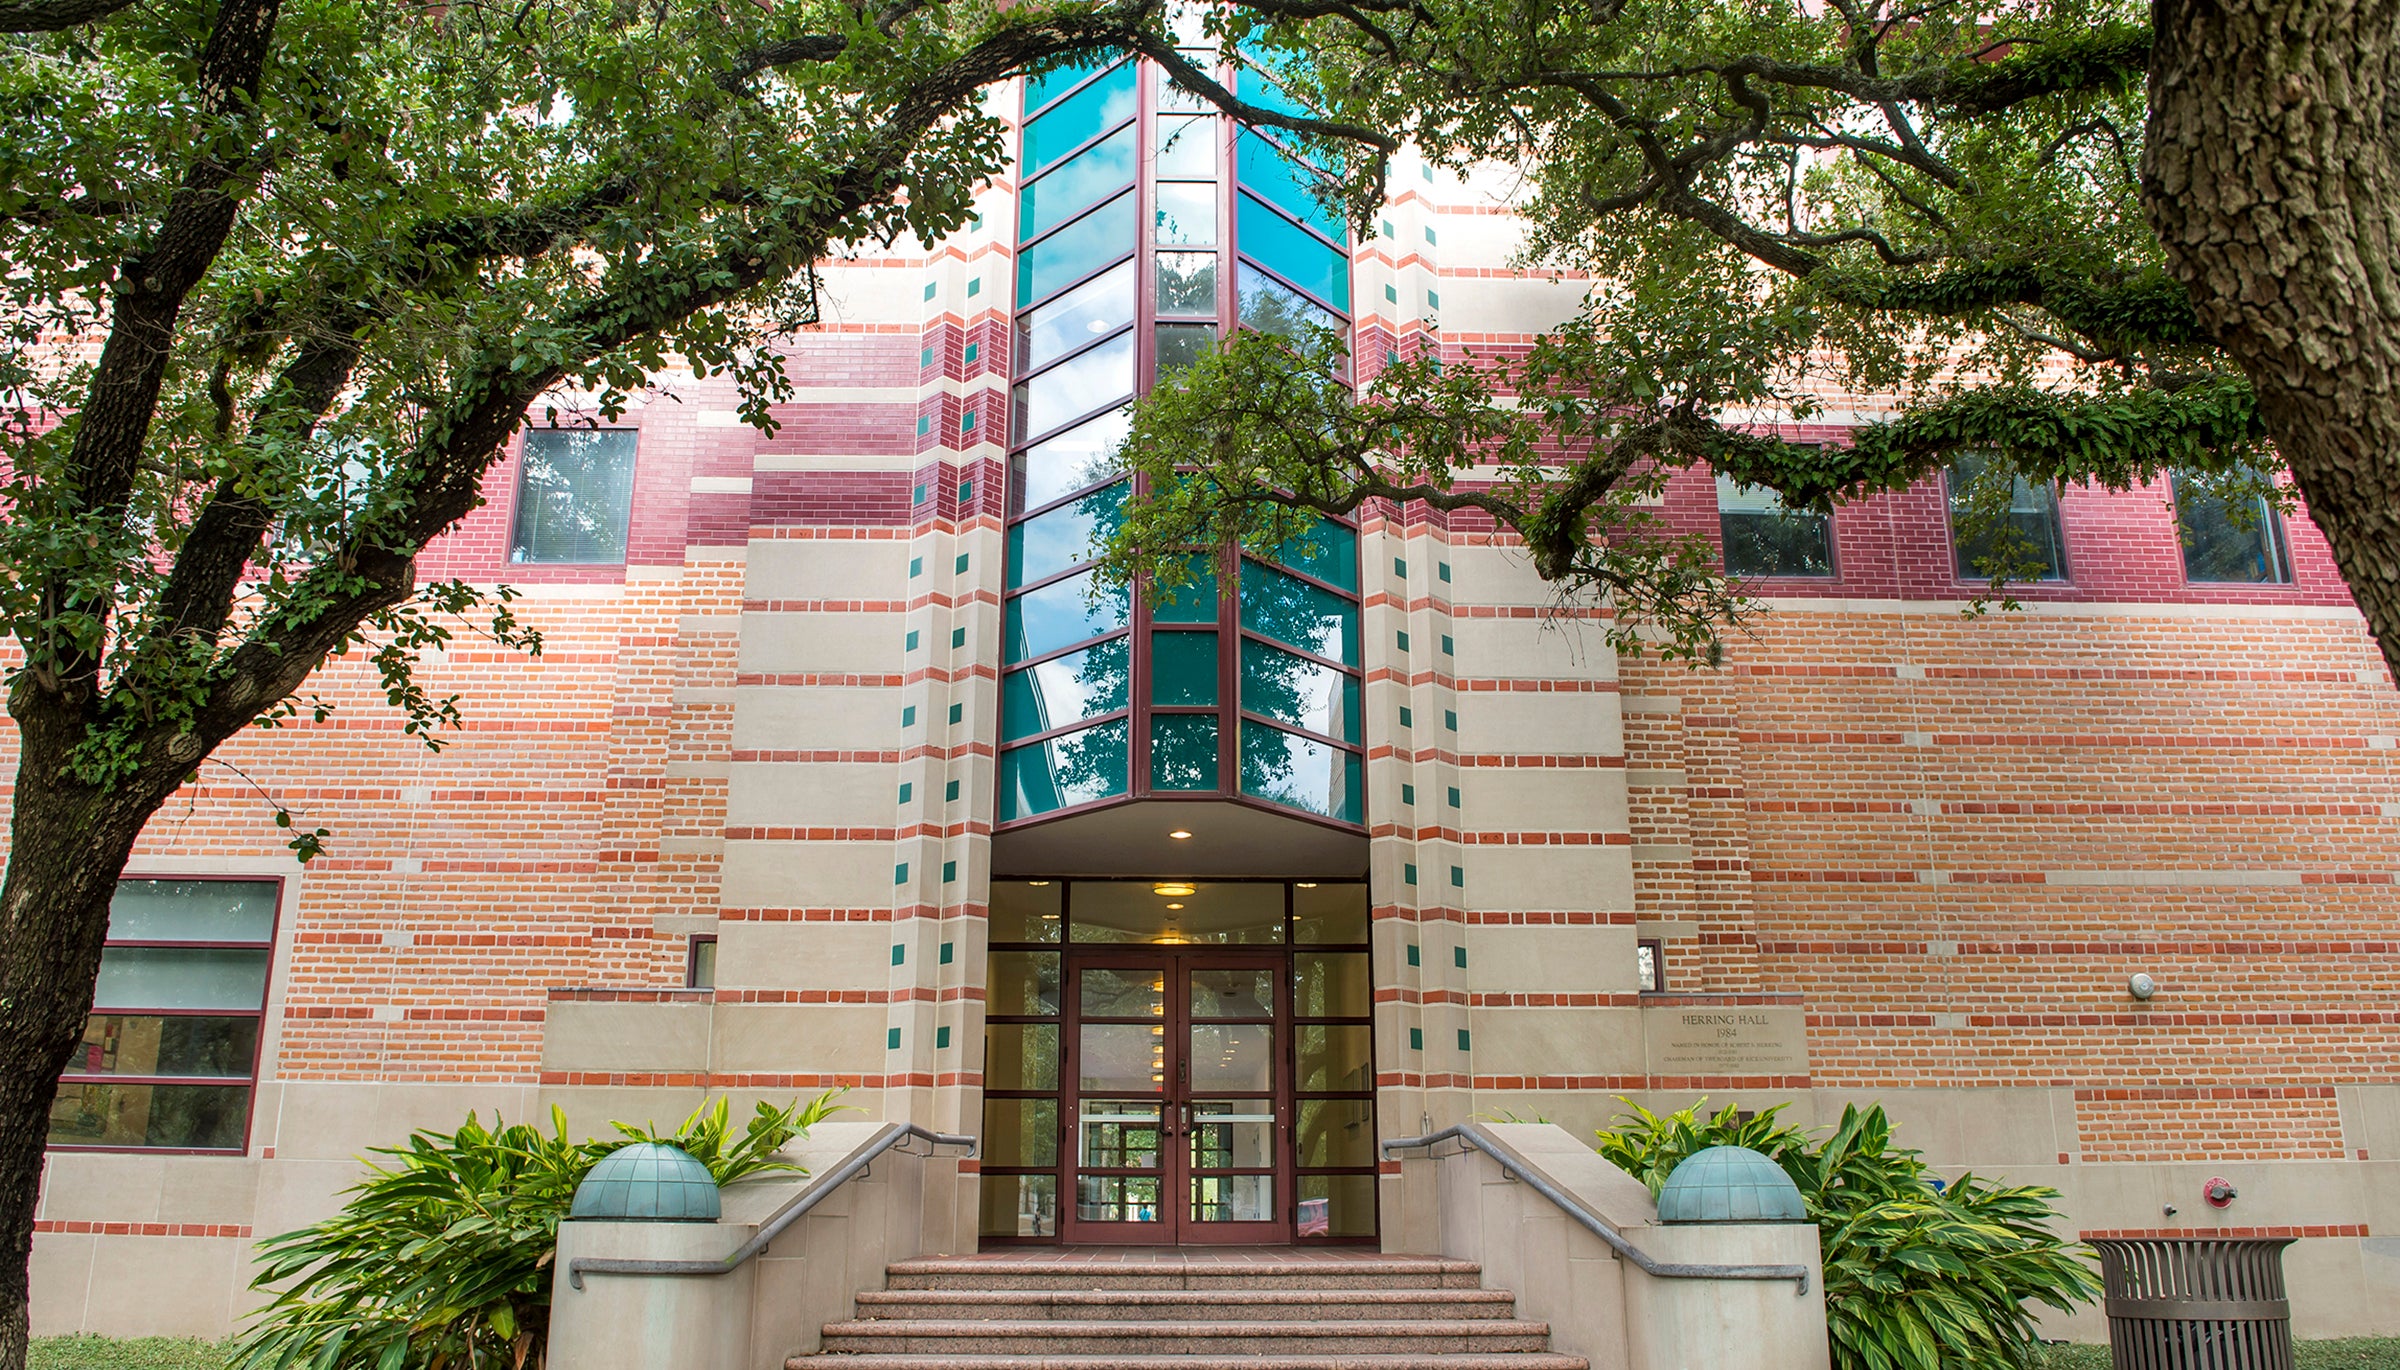 Rice's English Department is housed in Herring Hall